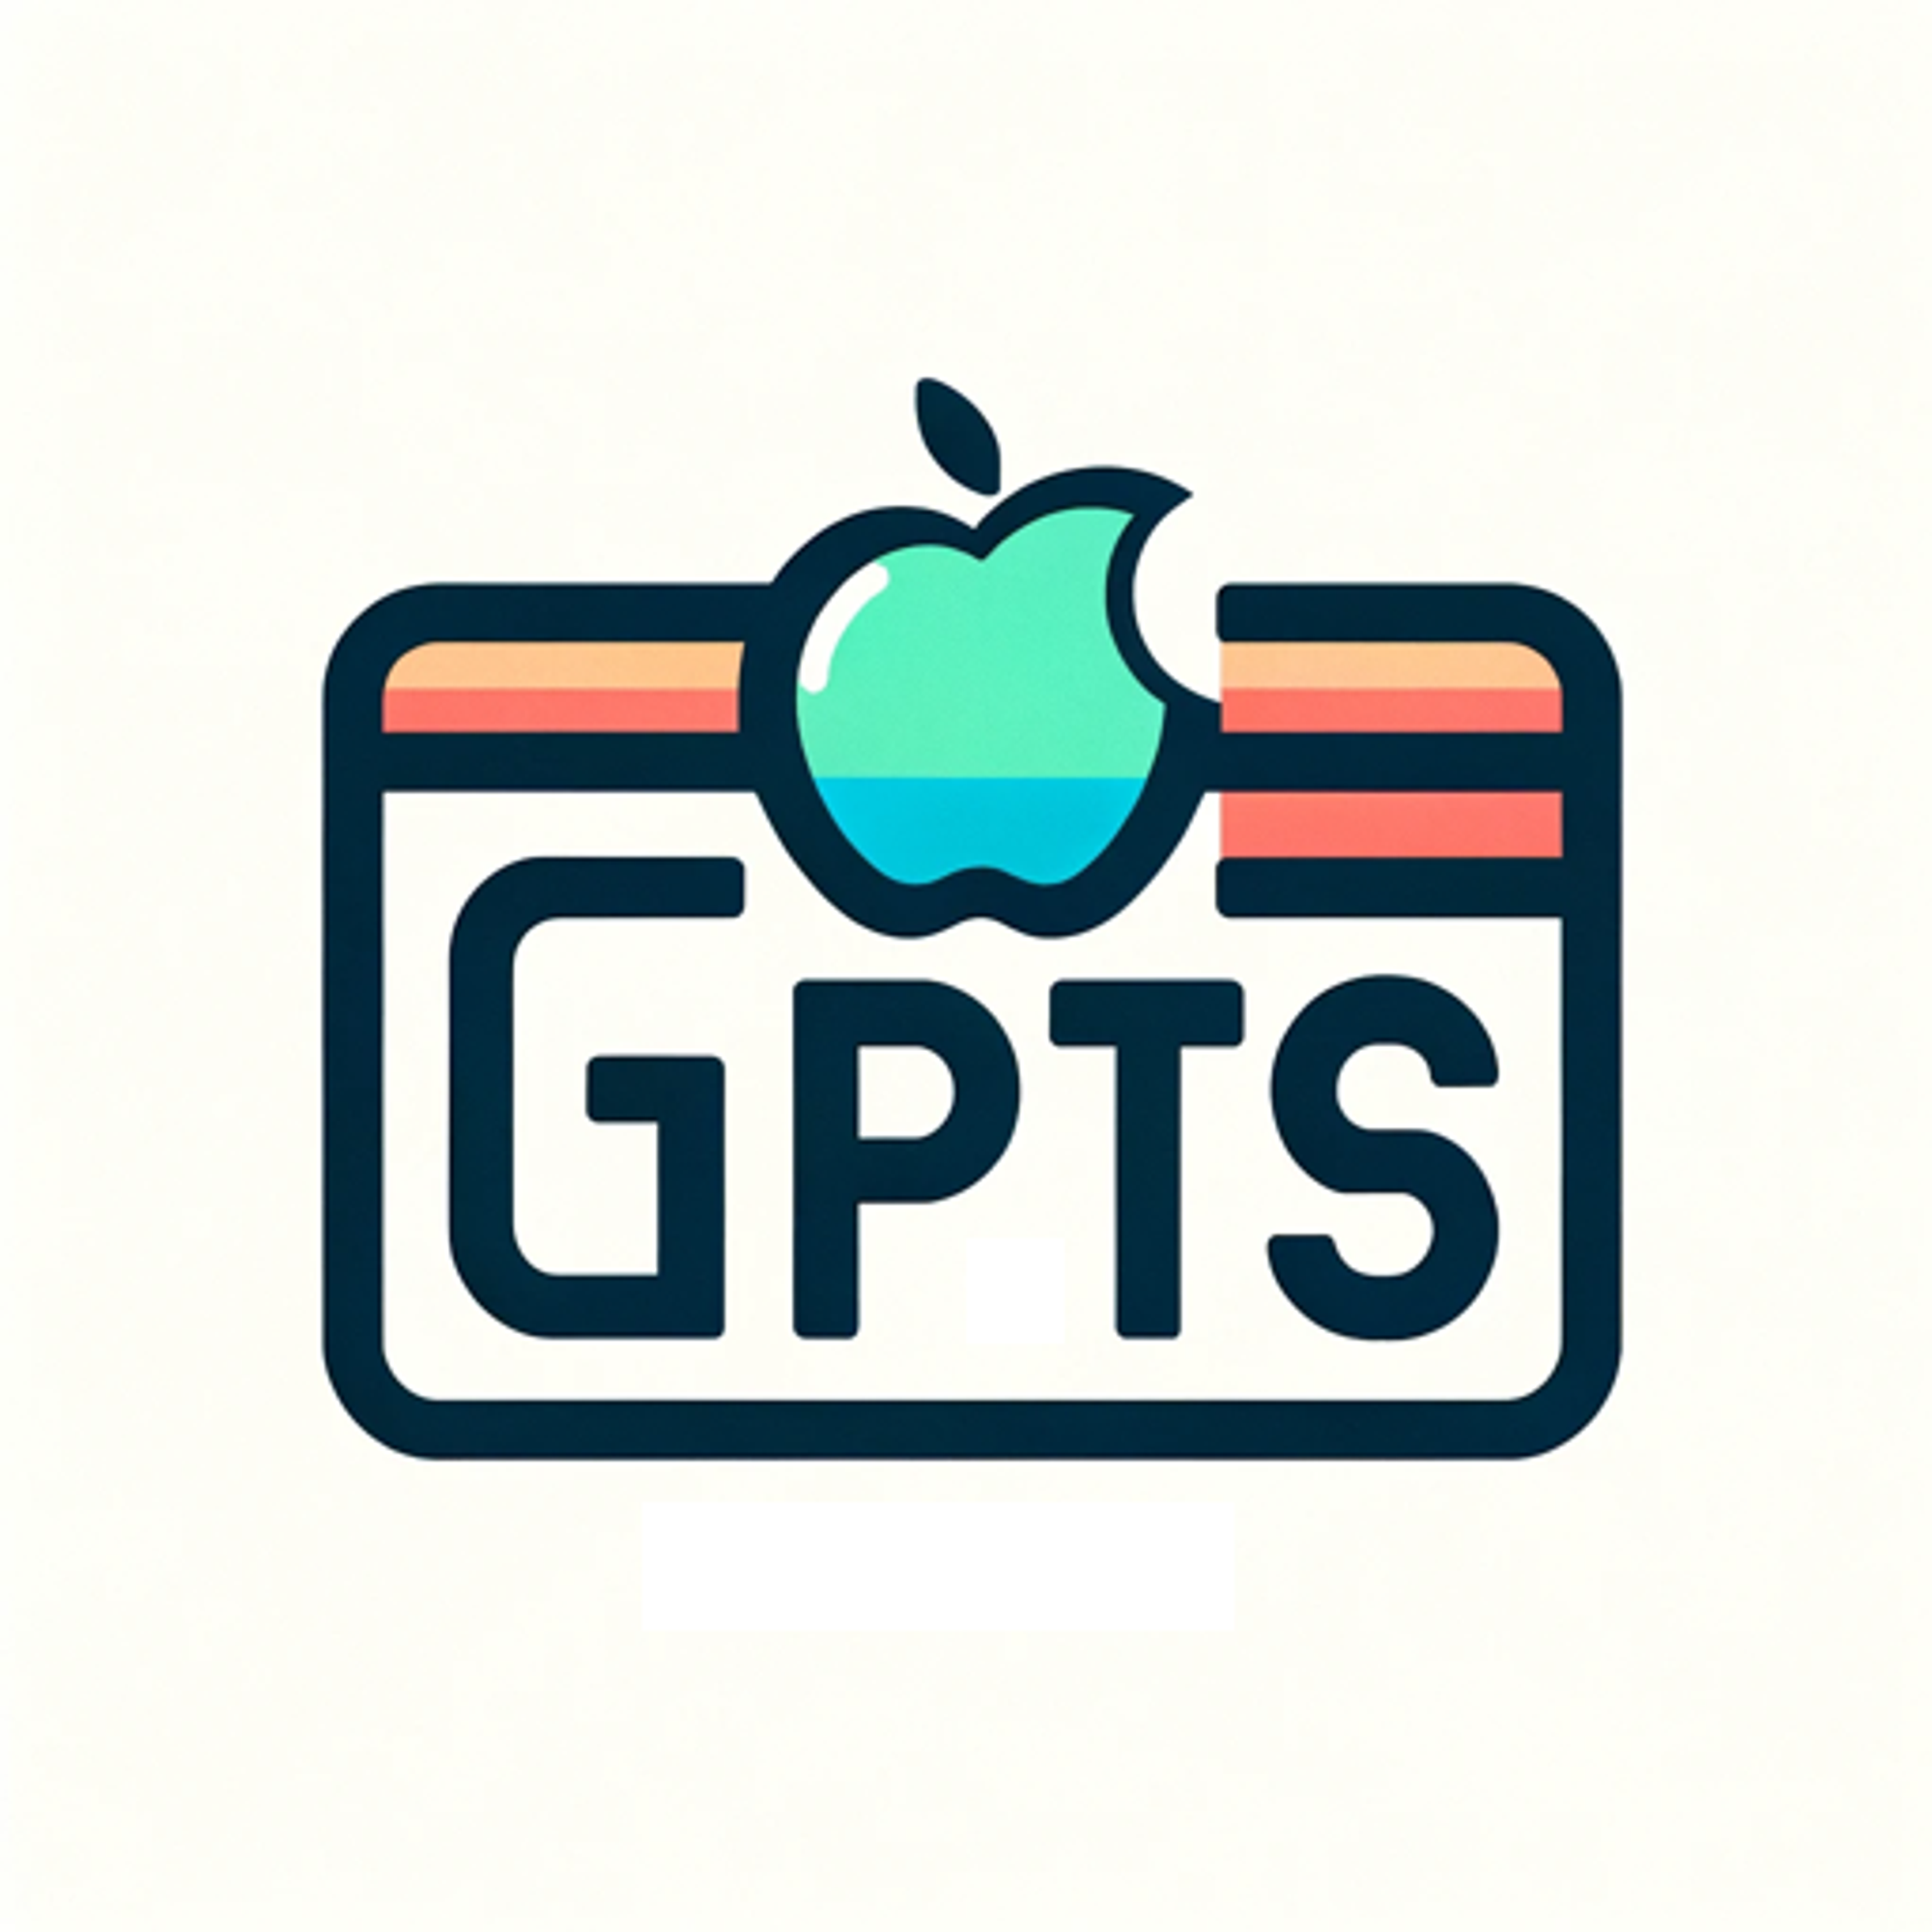 GPTs Works - Third-party GPTs store